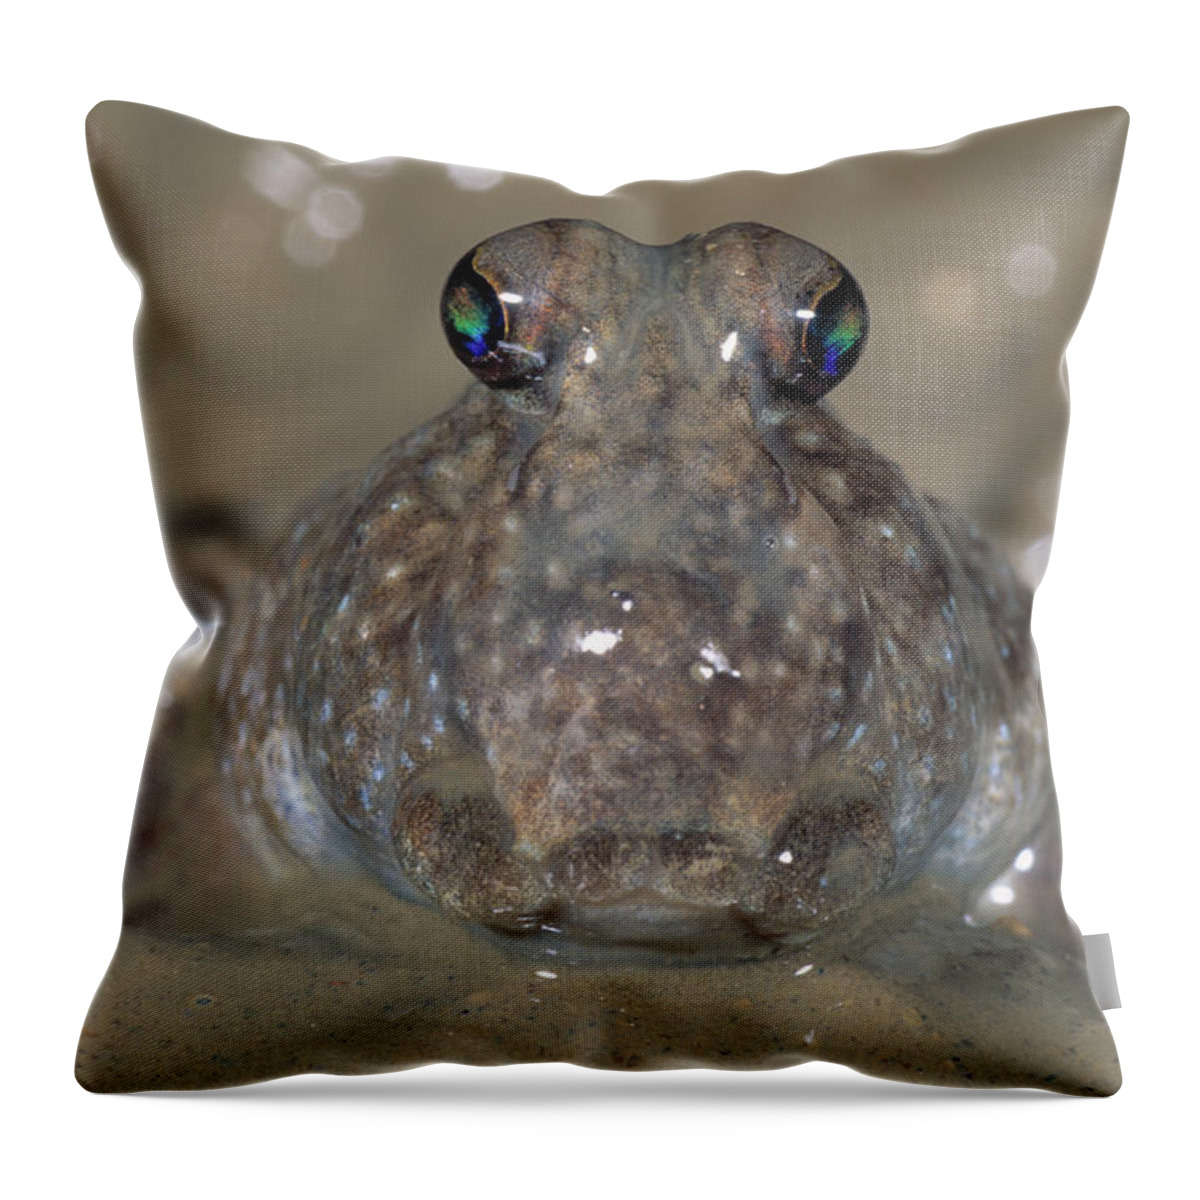 Animal Throw Pillow featuring the photograph Mudskipper Periopthalmus Sp by Nhpa